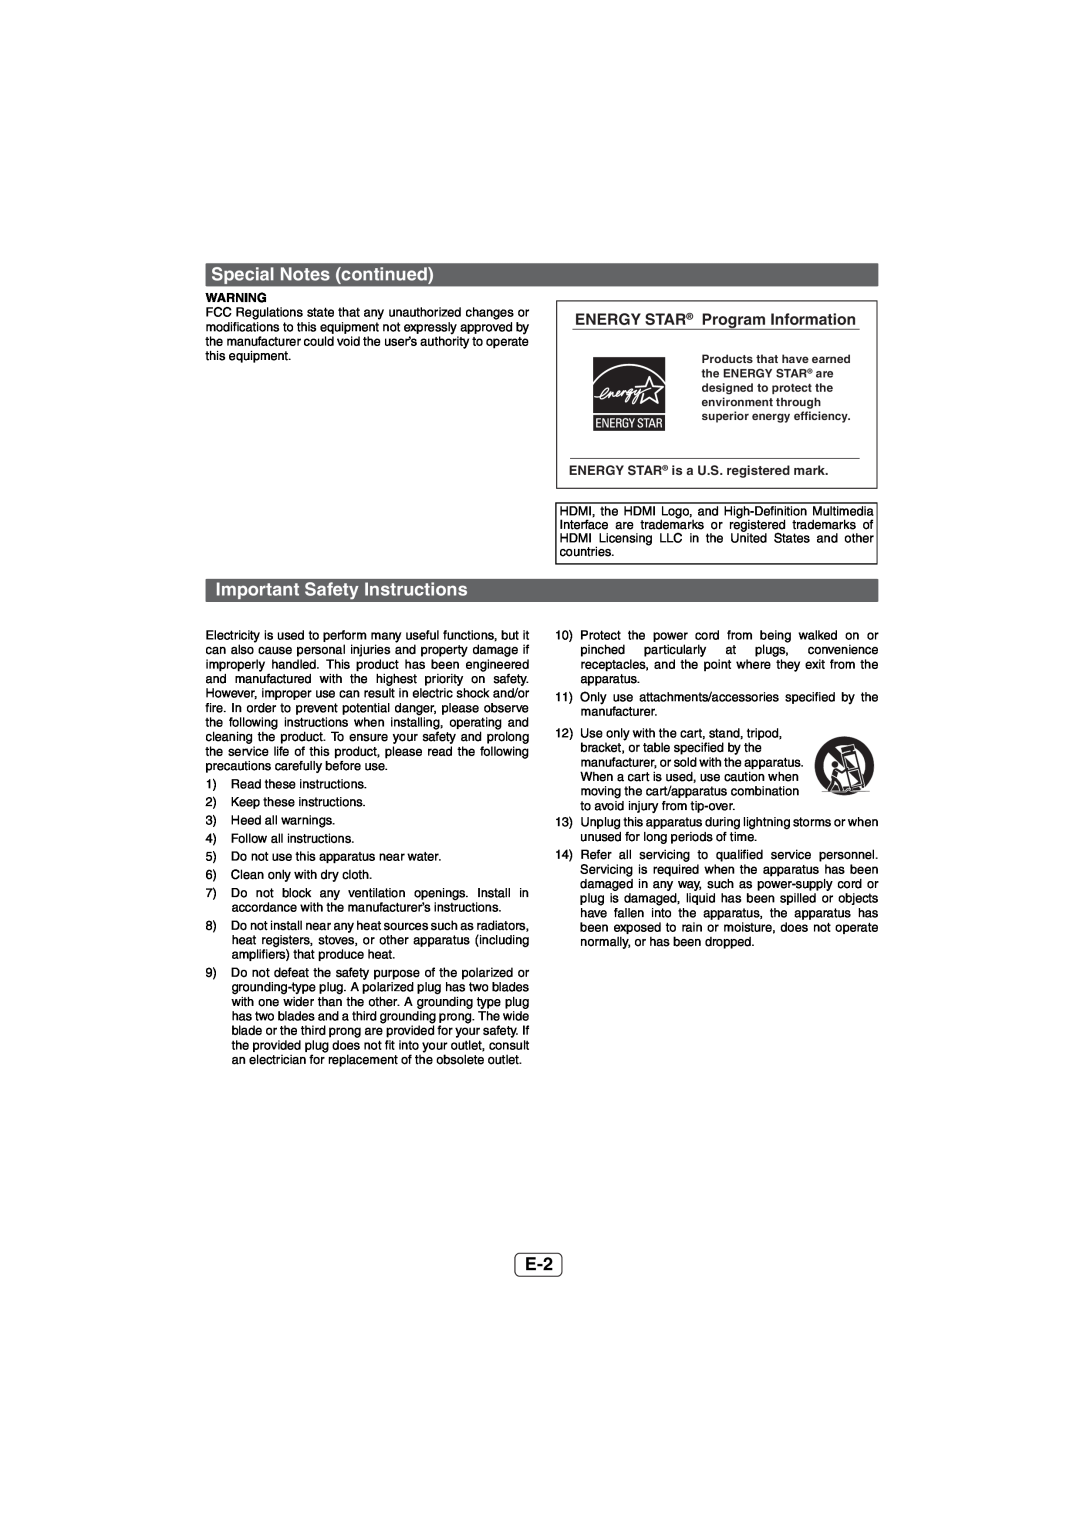 Sharp HT-SL50 operation manual Special Notes continued, Important Safety Instructions, ENERGY STAR Program Information 